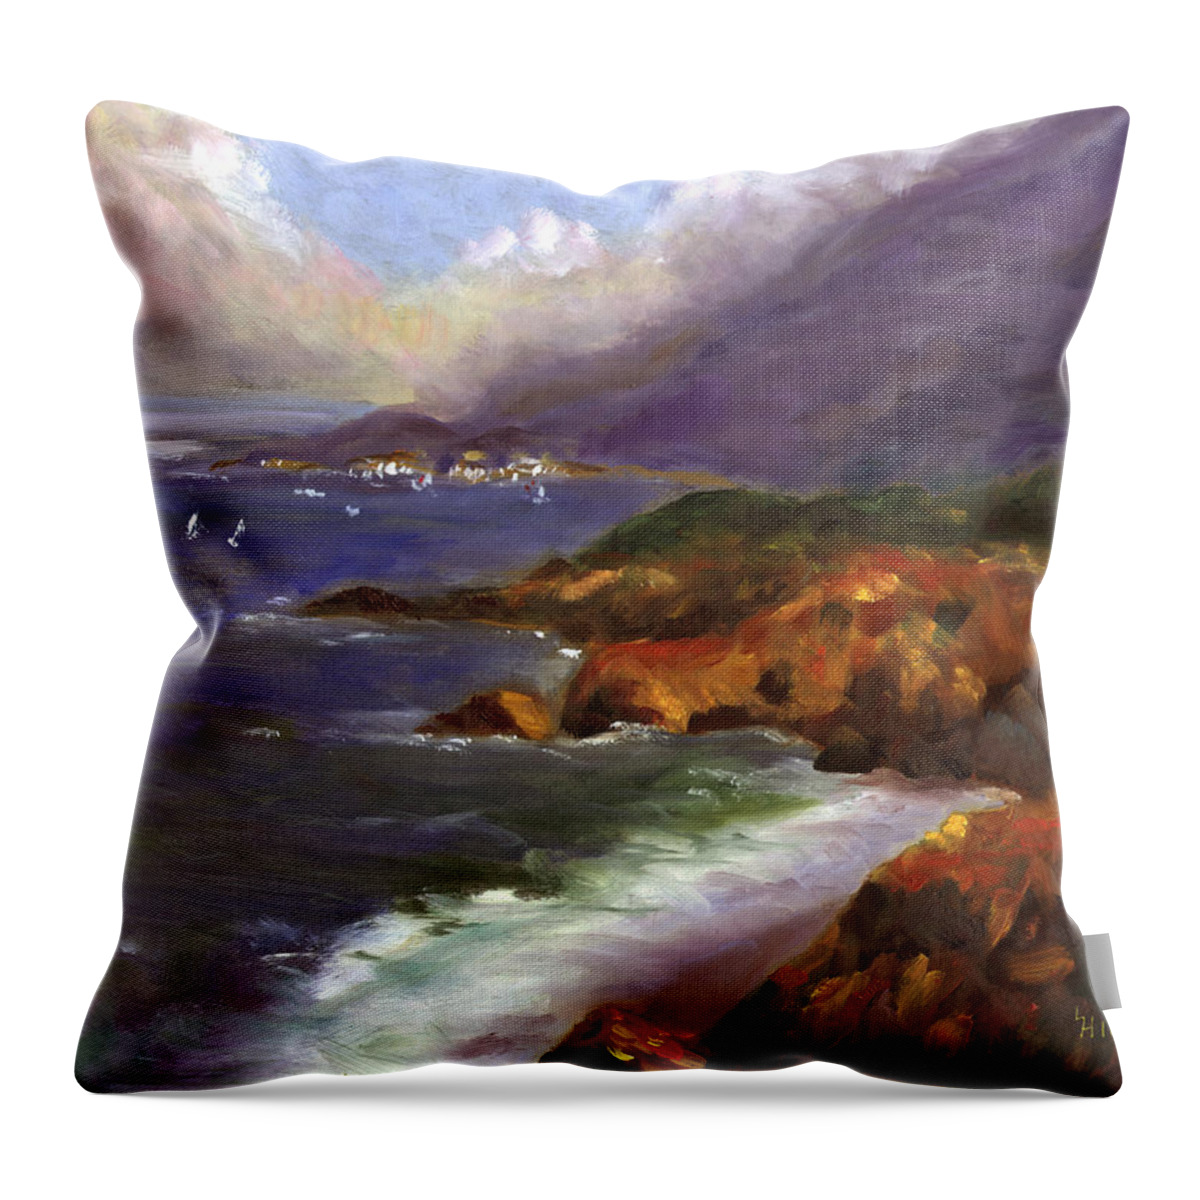 Ocean Throw Pillow featuring the painting Emerald Surf by Linda Hiller